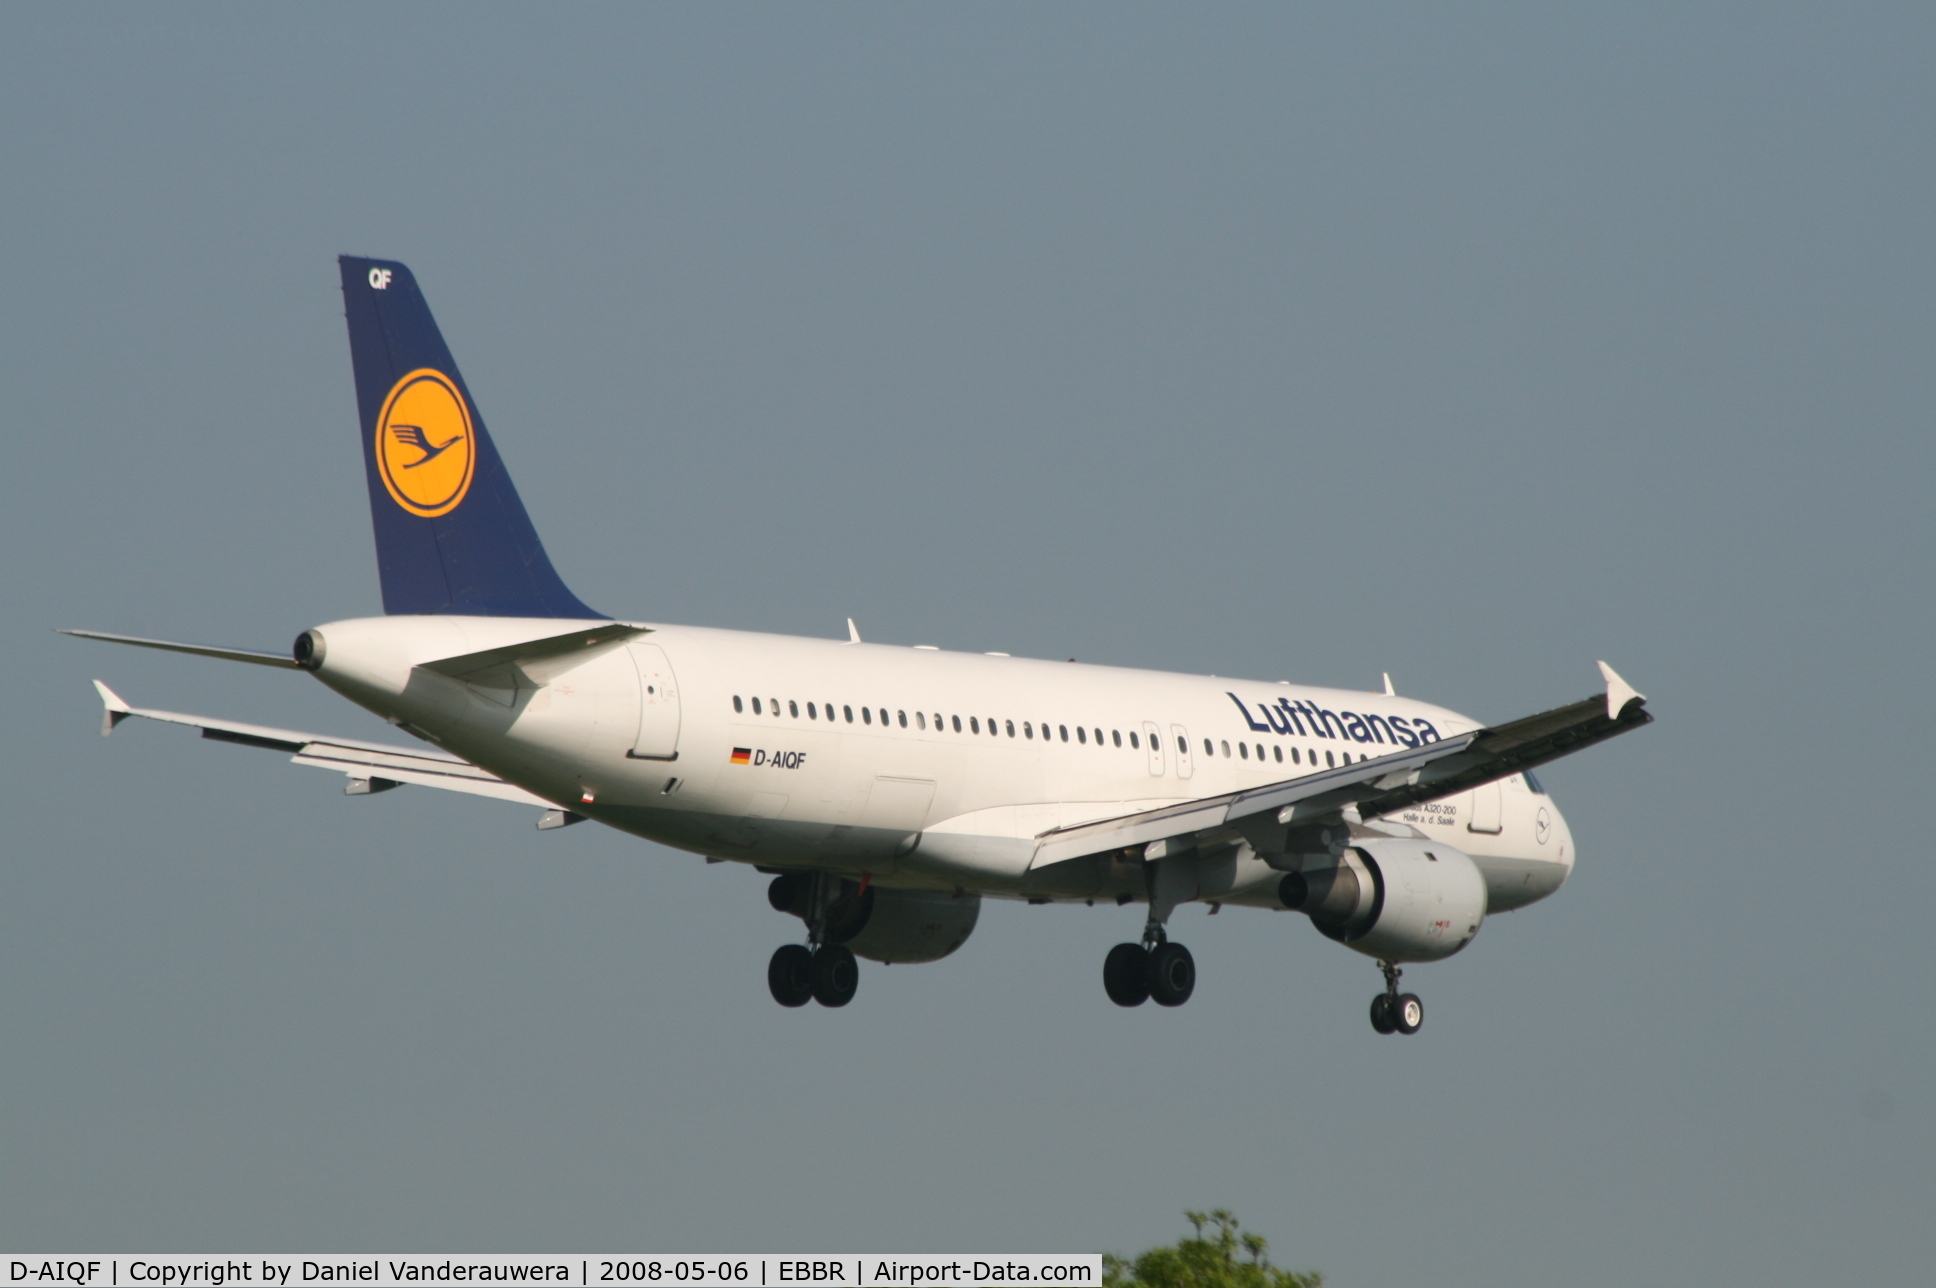 D-AIQF, 1991 Airbus A320-211 C/N 216, descending to rwy 02